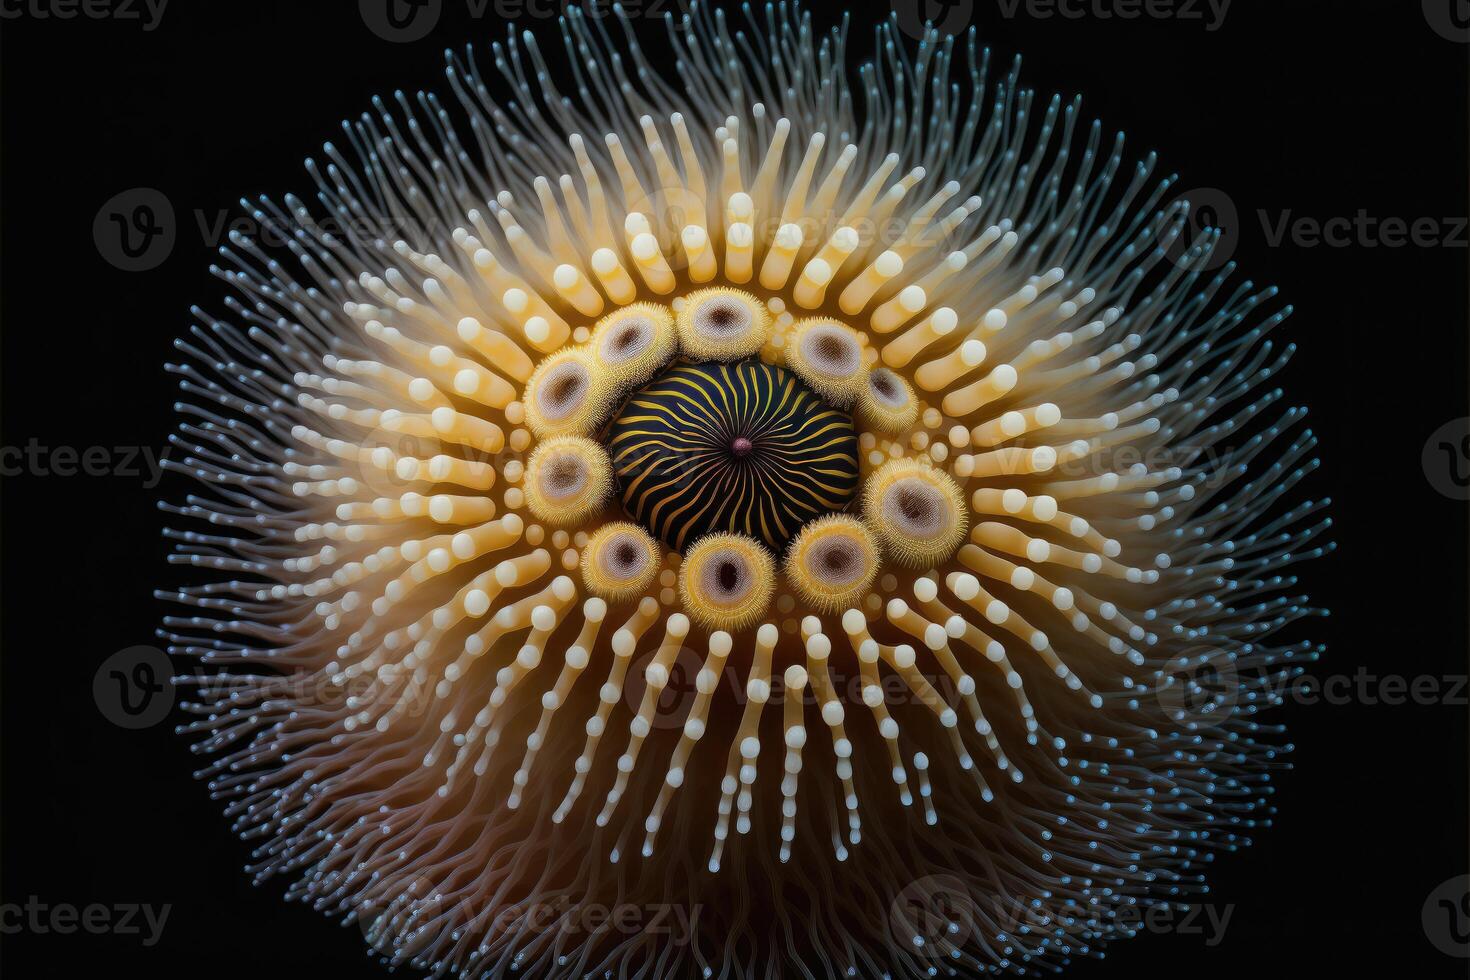 The beautiful and deadly sea anemones of the deep. photo